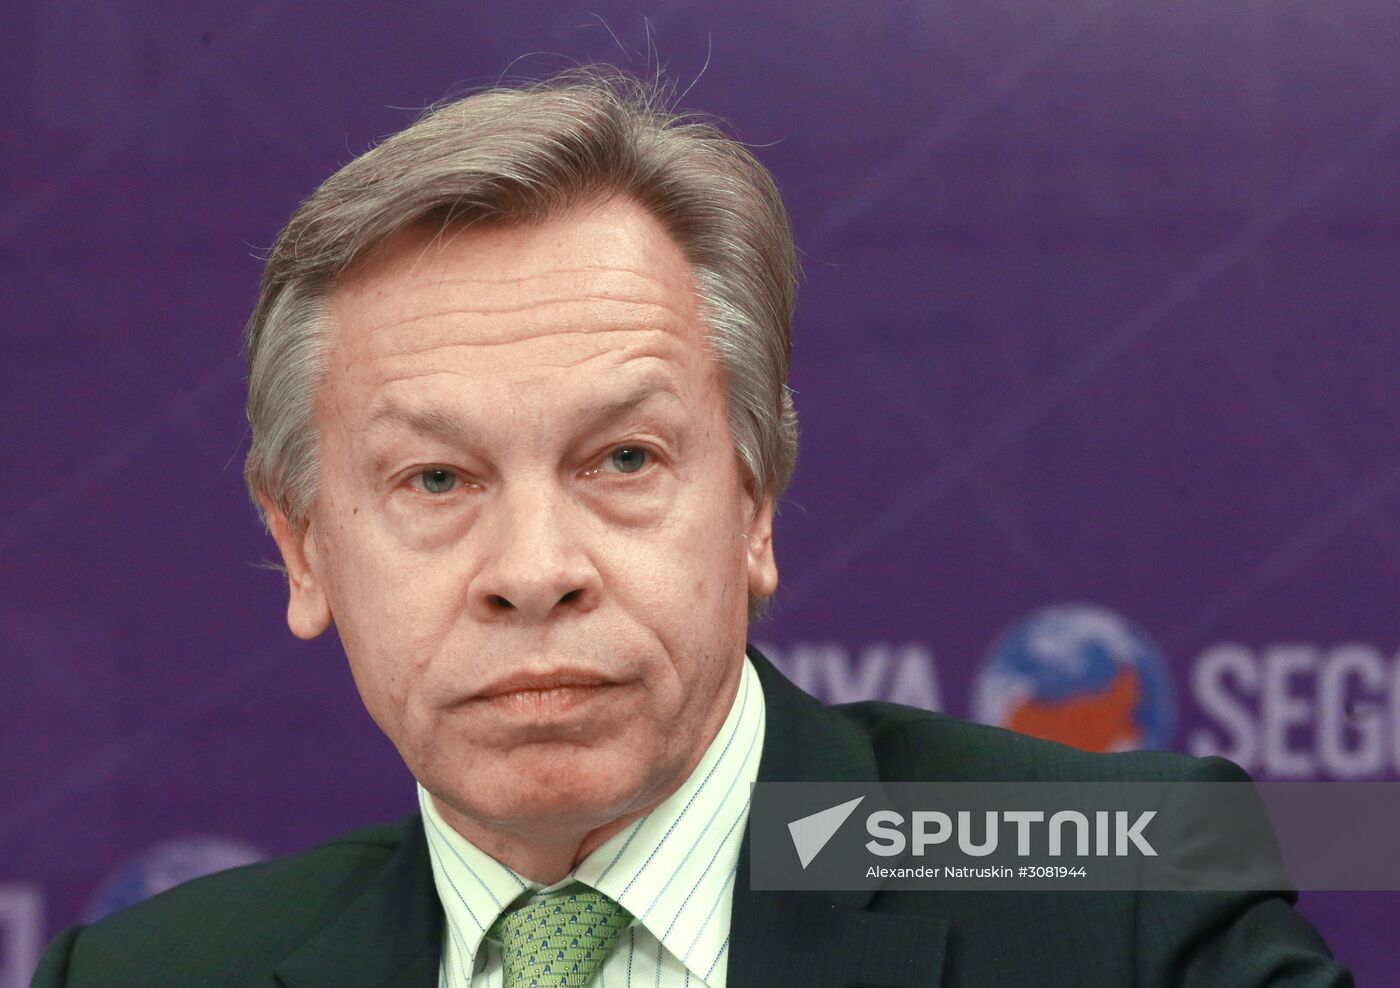 News conference by Alexei Pushkov on the results of the first round in the French presidential election